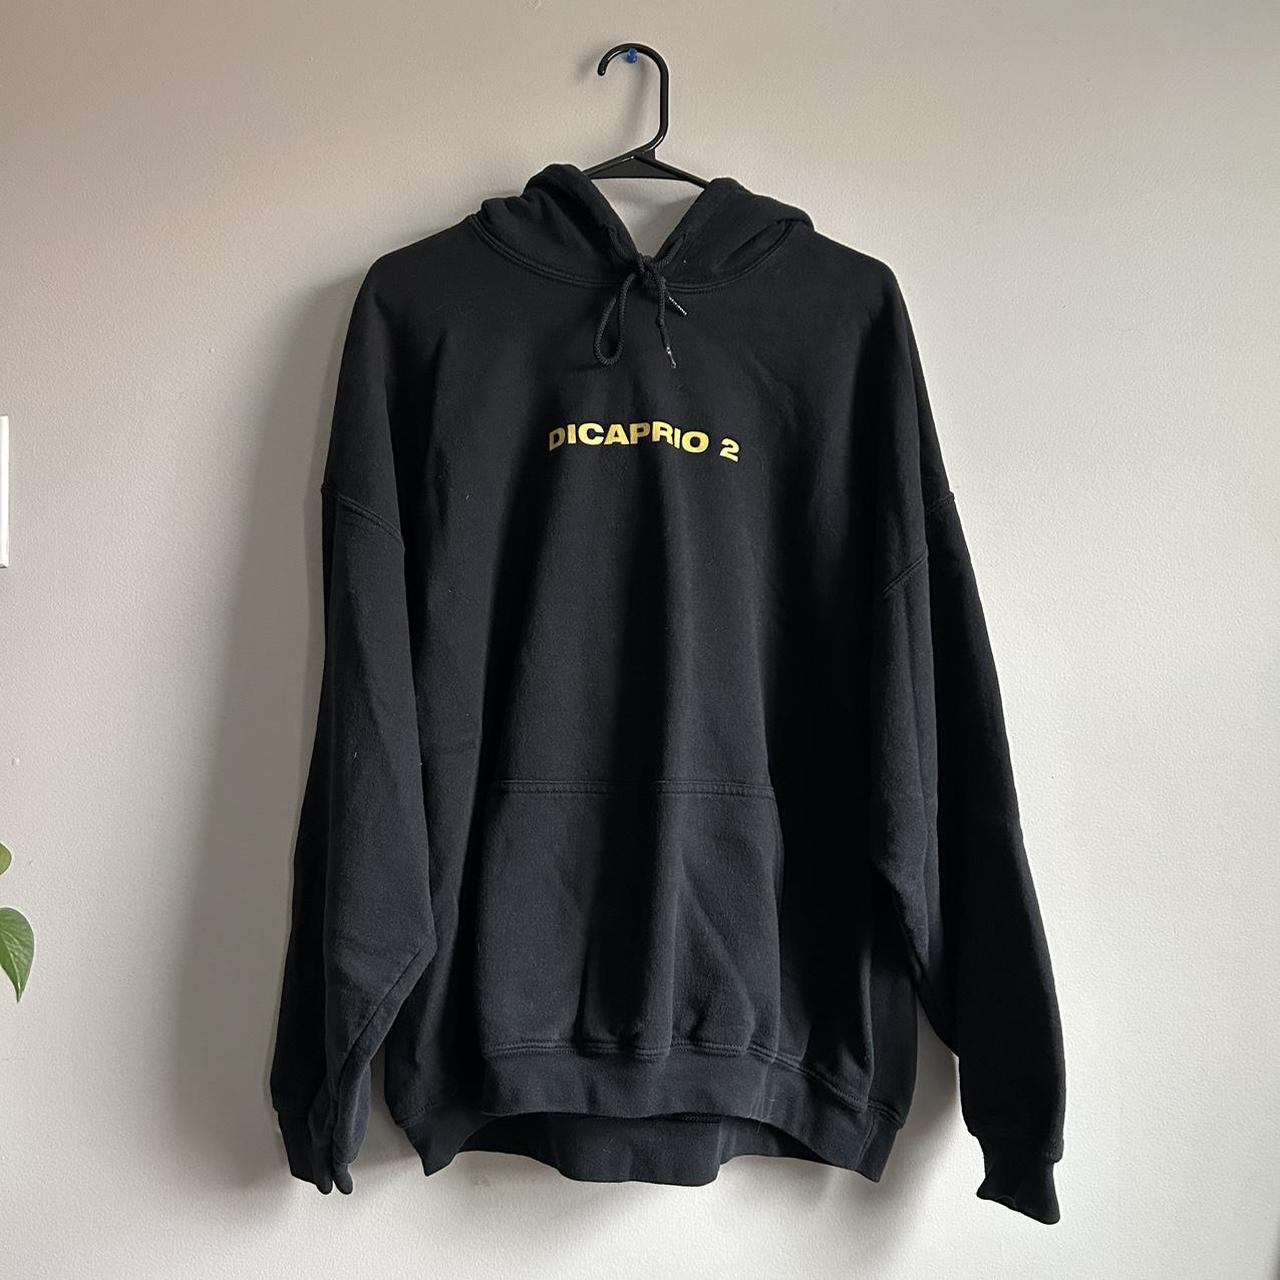 JID “DiCaprio 2” Catch Me If You Can Tour hoodie... - Depop